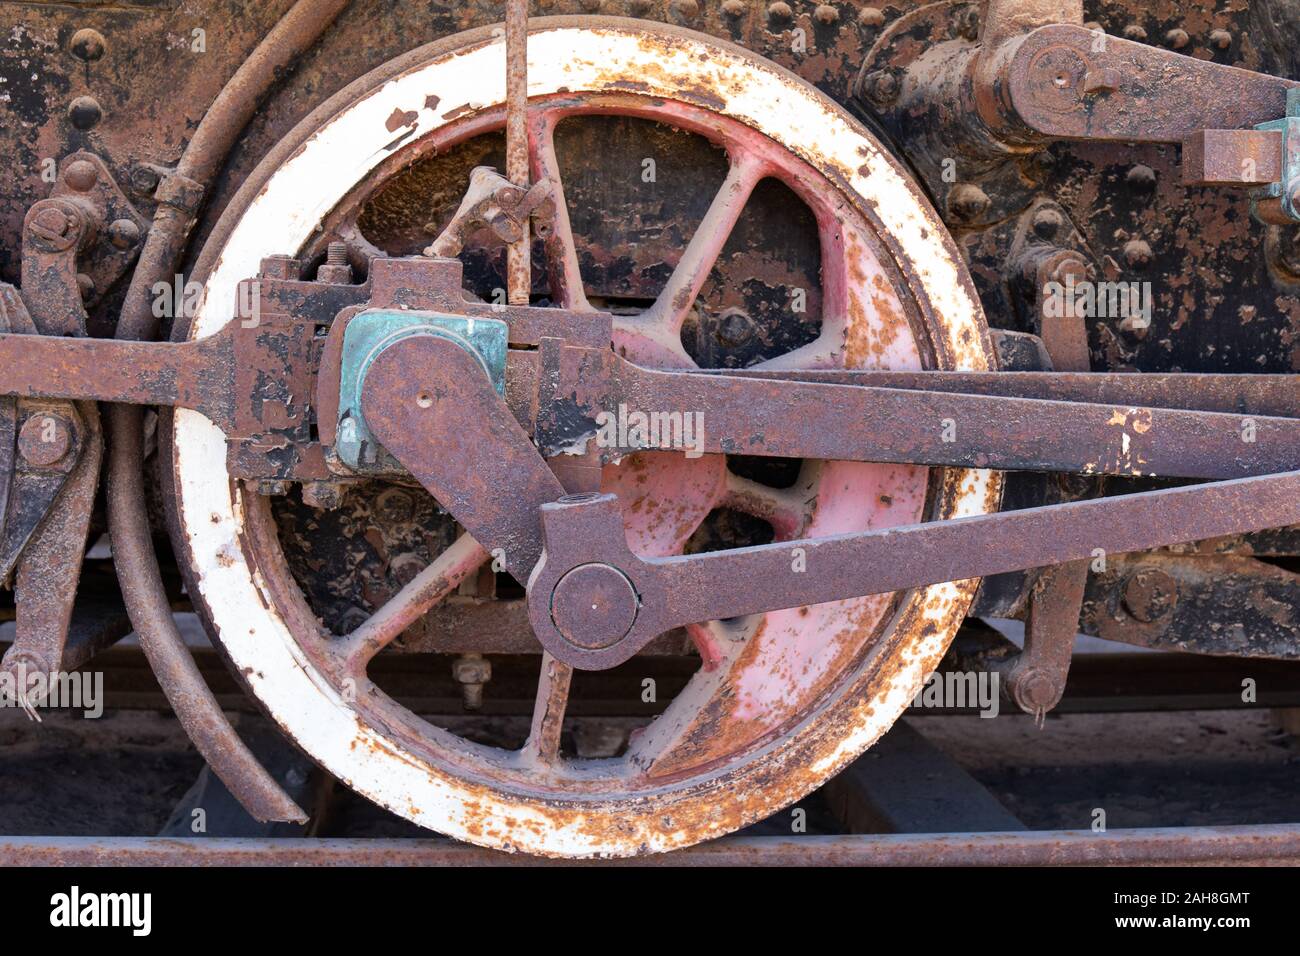 The wheel from an Old Steam Train at the abandoned Humberstone Saltpeter factory in the Atacama Desert, Northern Chile Stock Photo